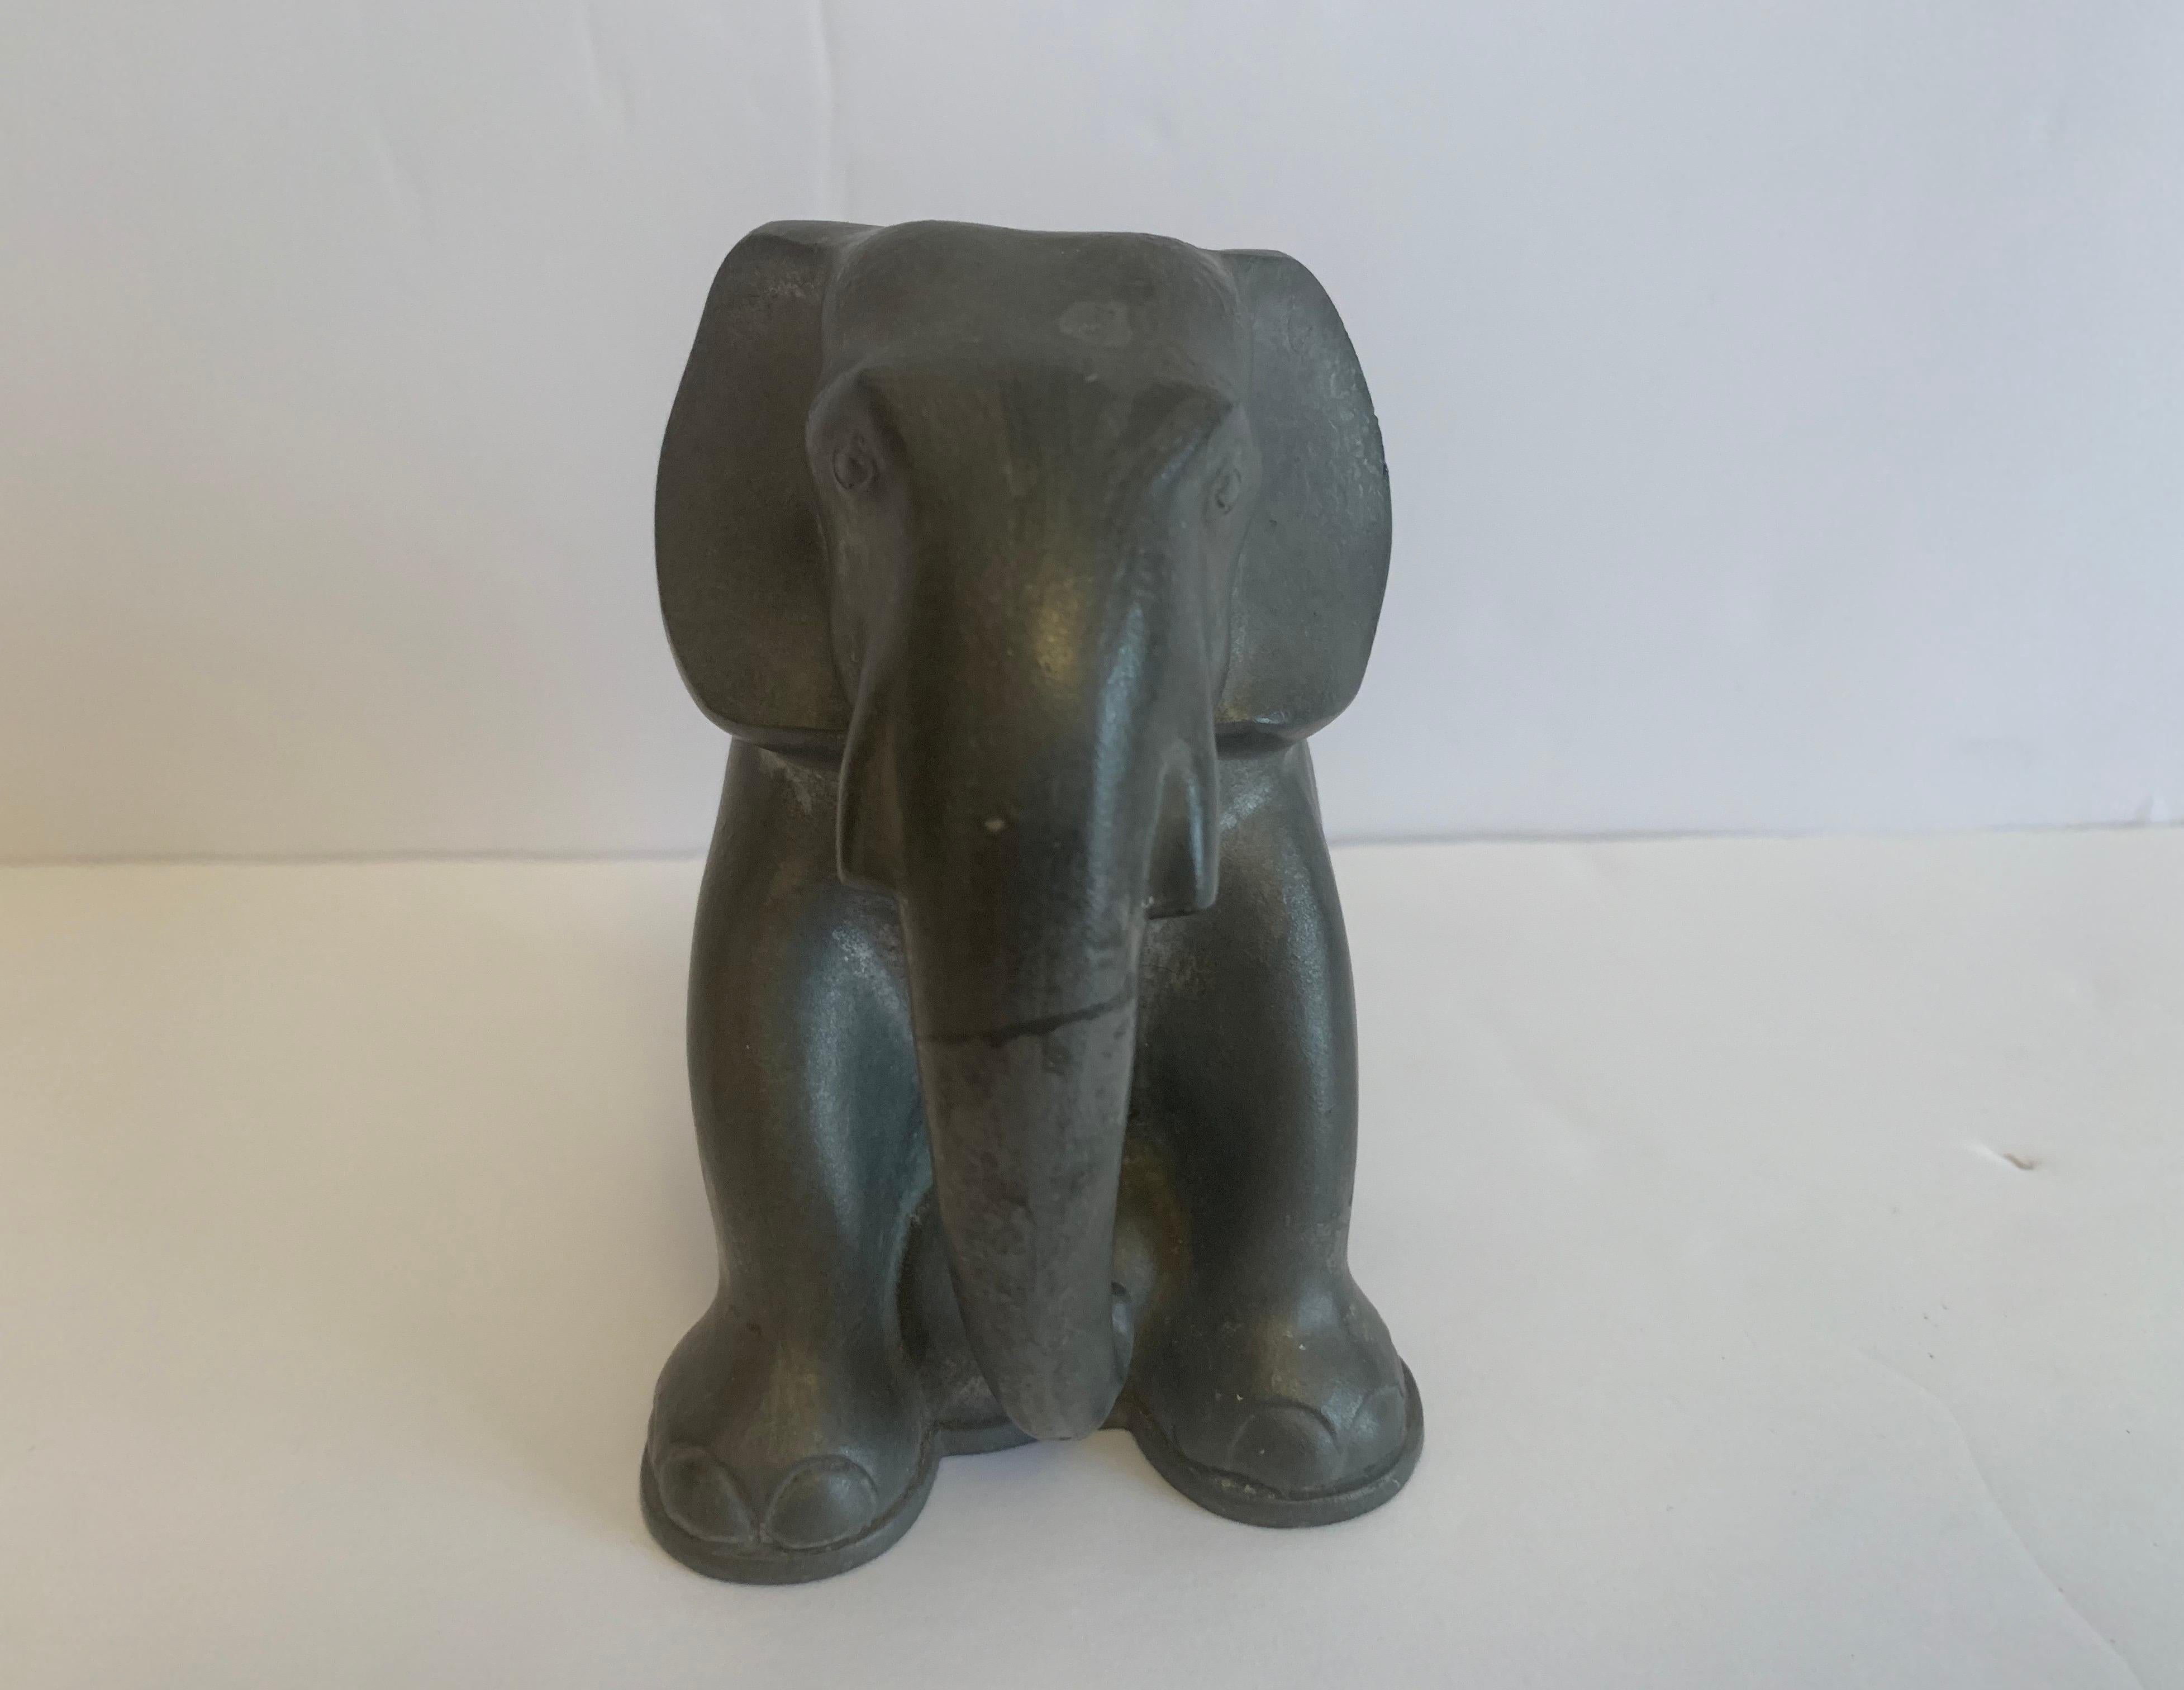 One 1930s Danish Art Deco pewter elephant bookend by sculptor, Just Andersen.